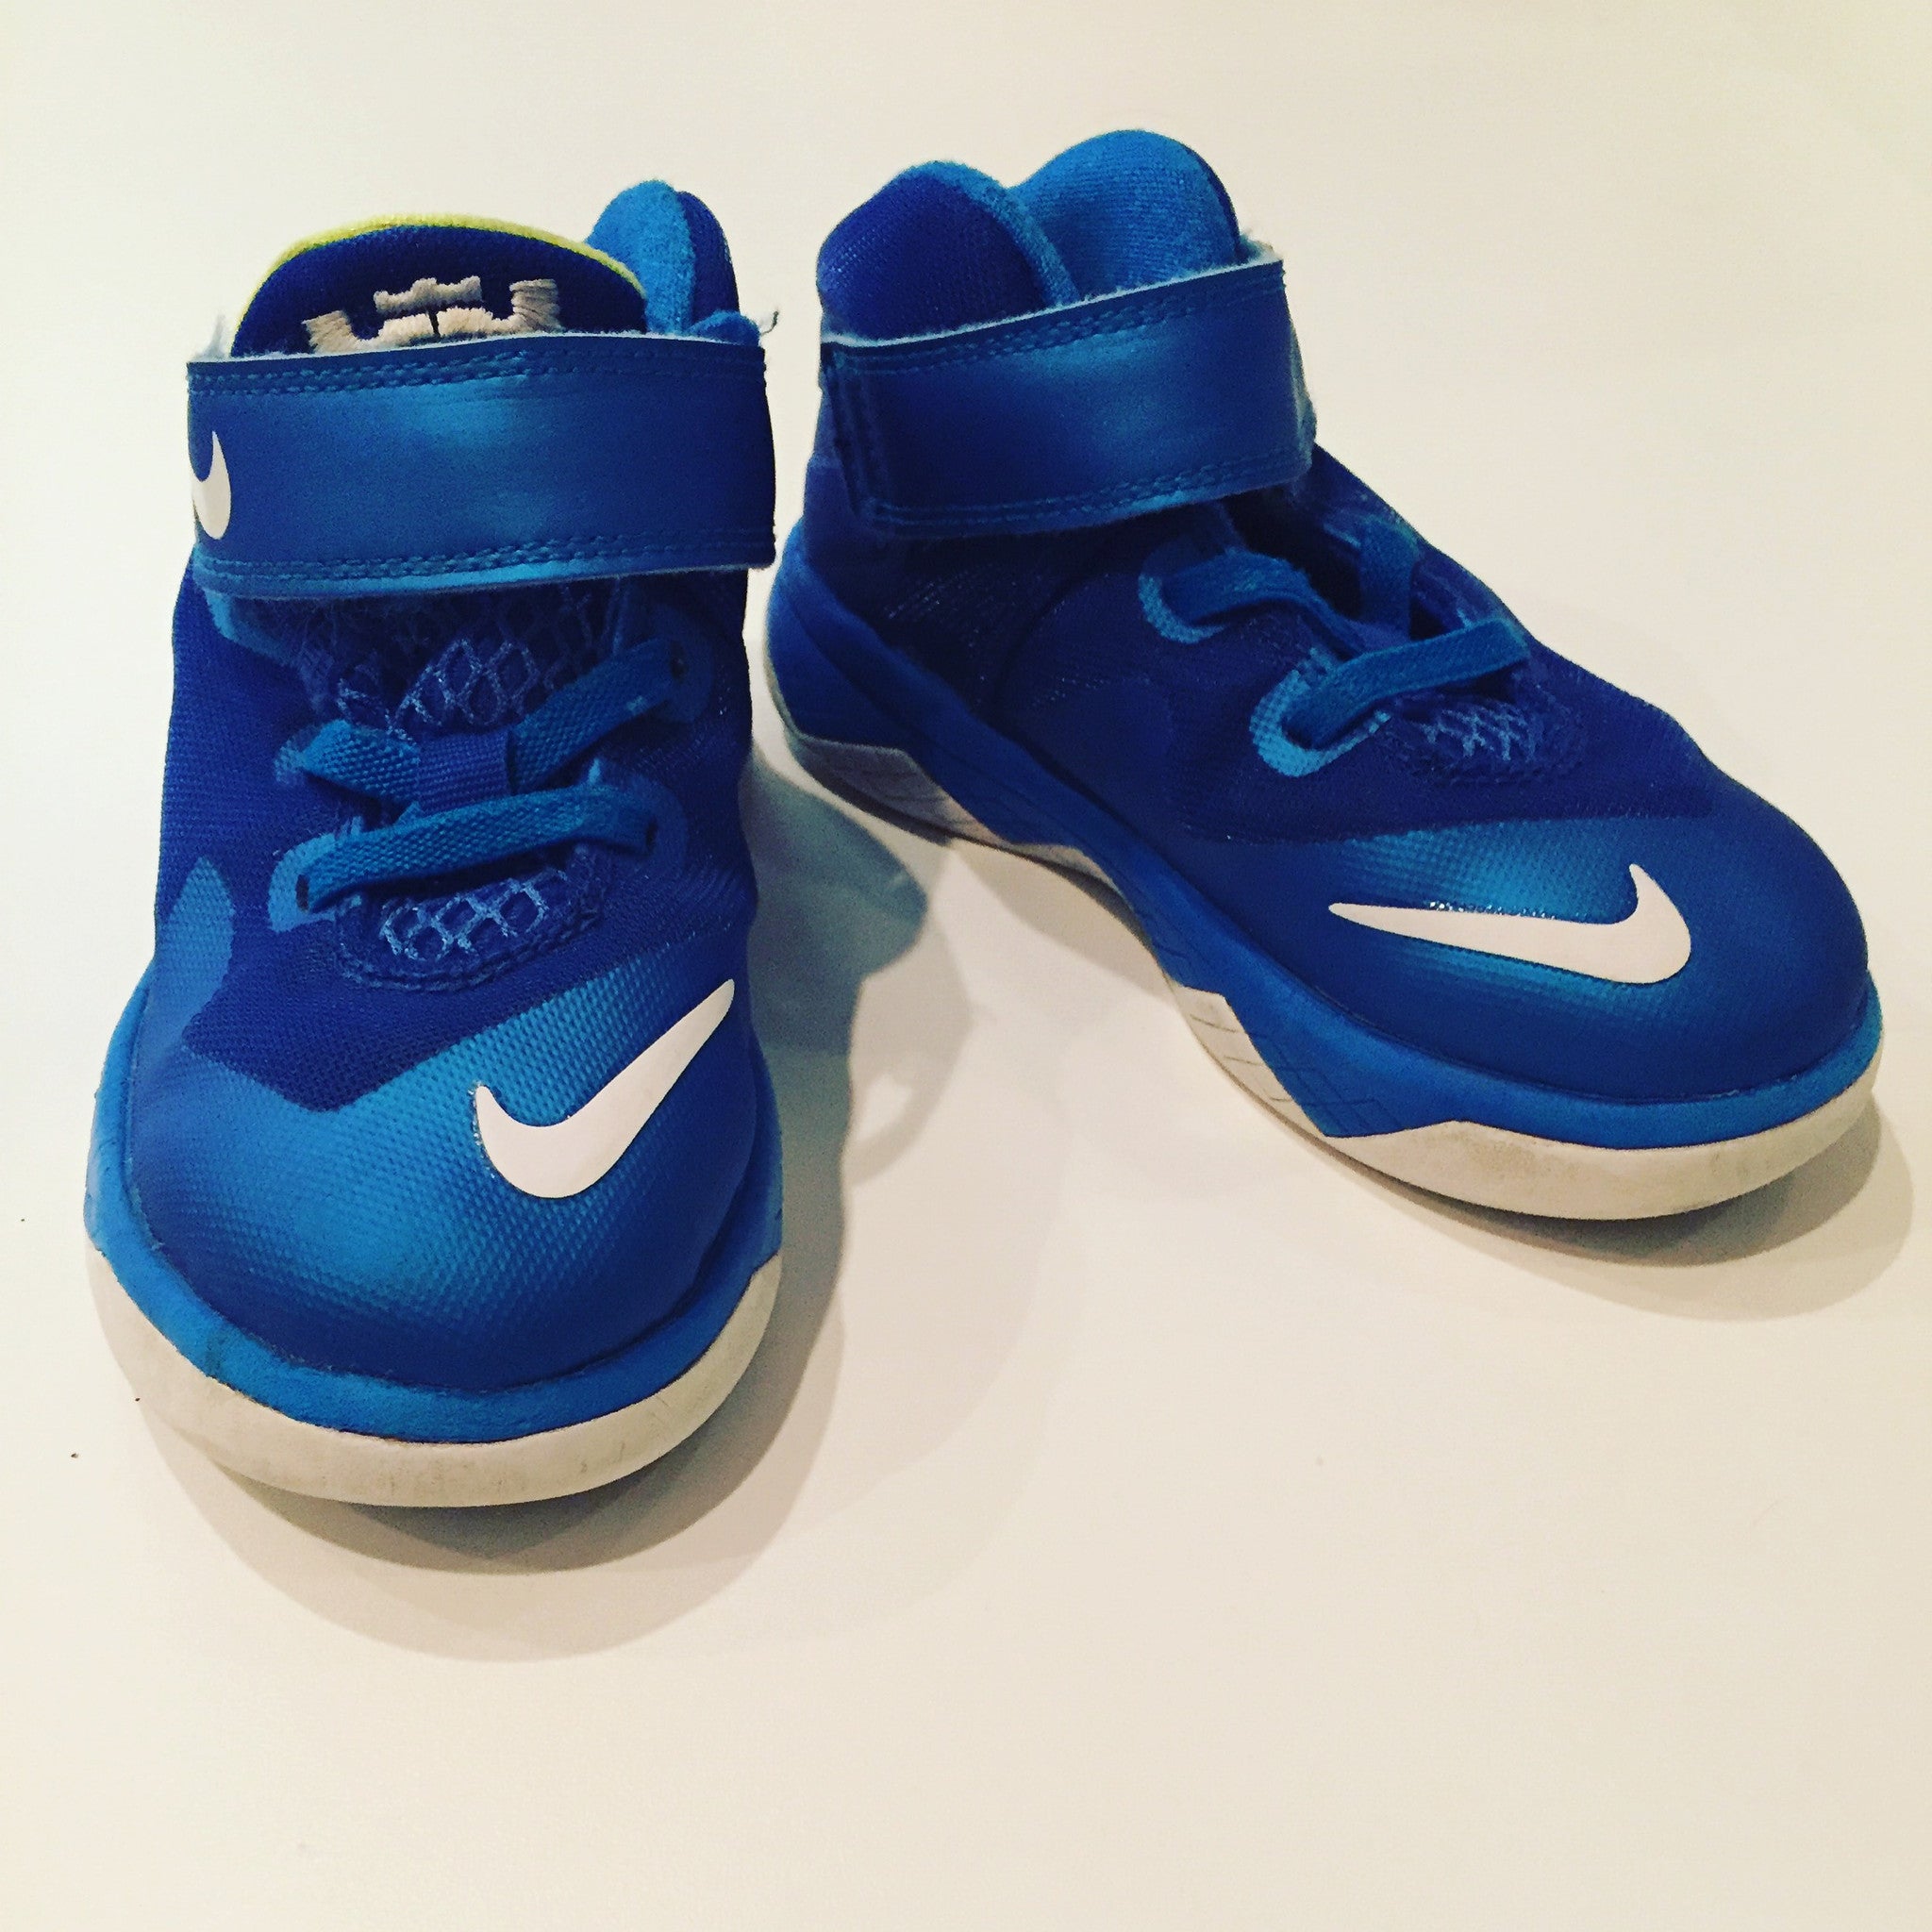 shoes for boys blue